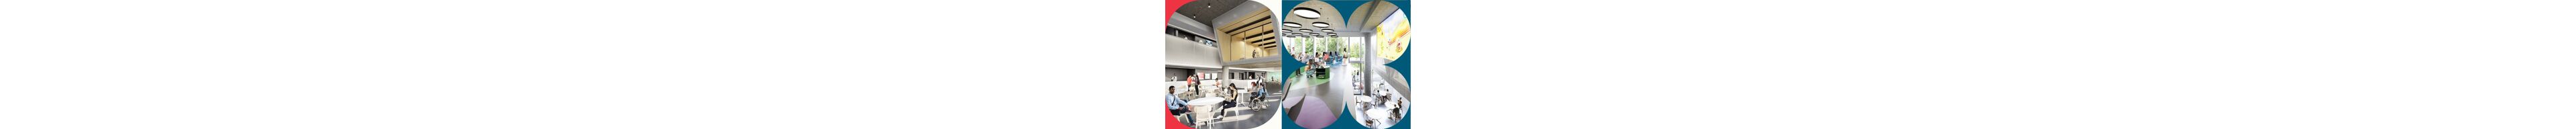 A collage of vibrant college interiors showcasing contemporary architecture and inclusive student environments.